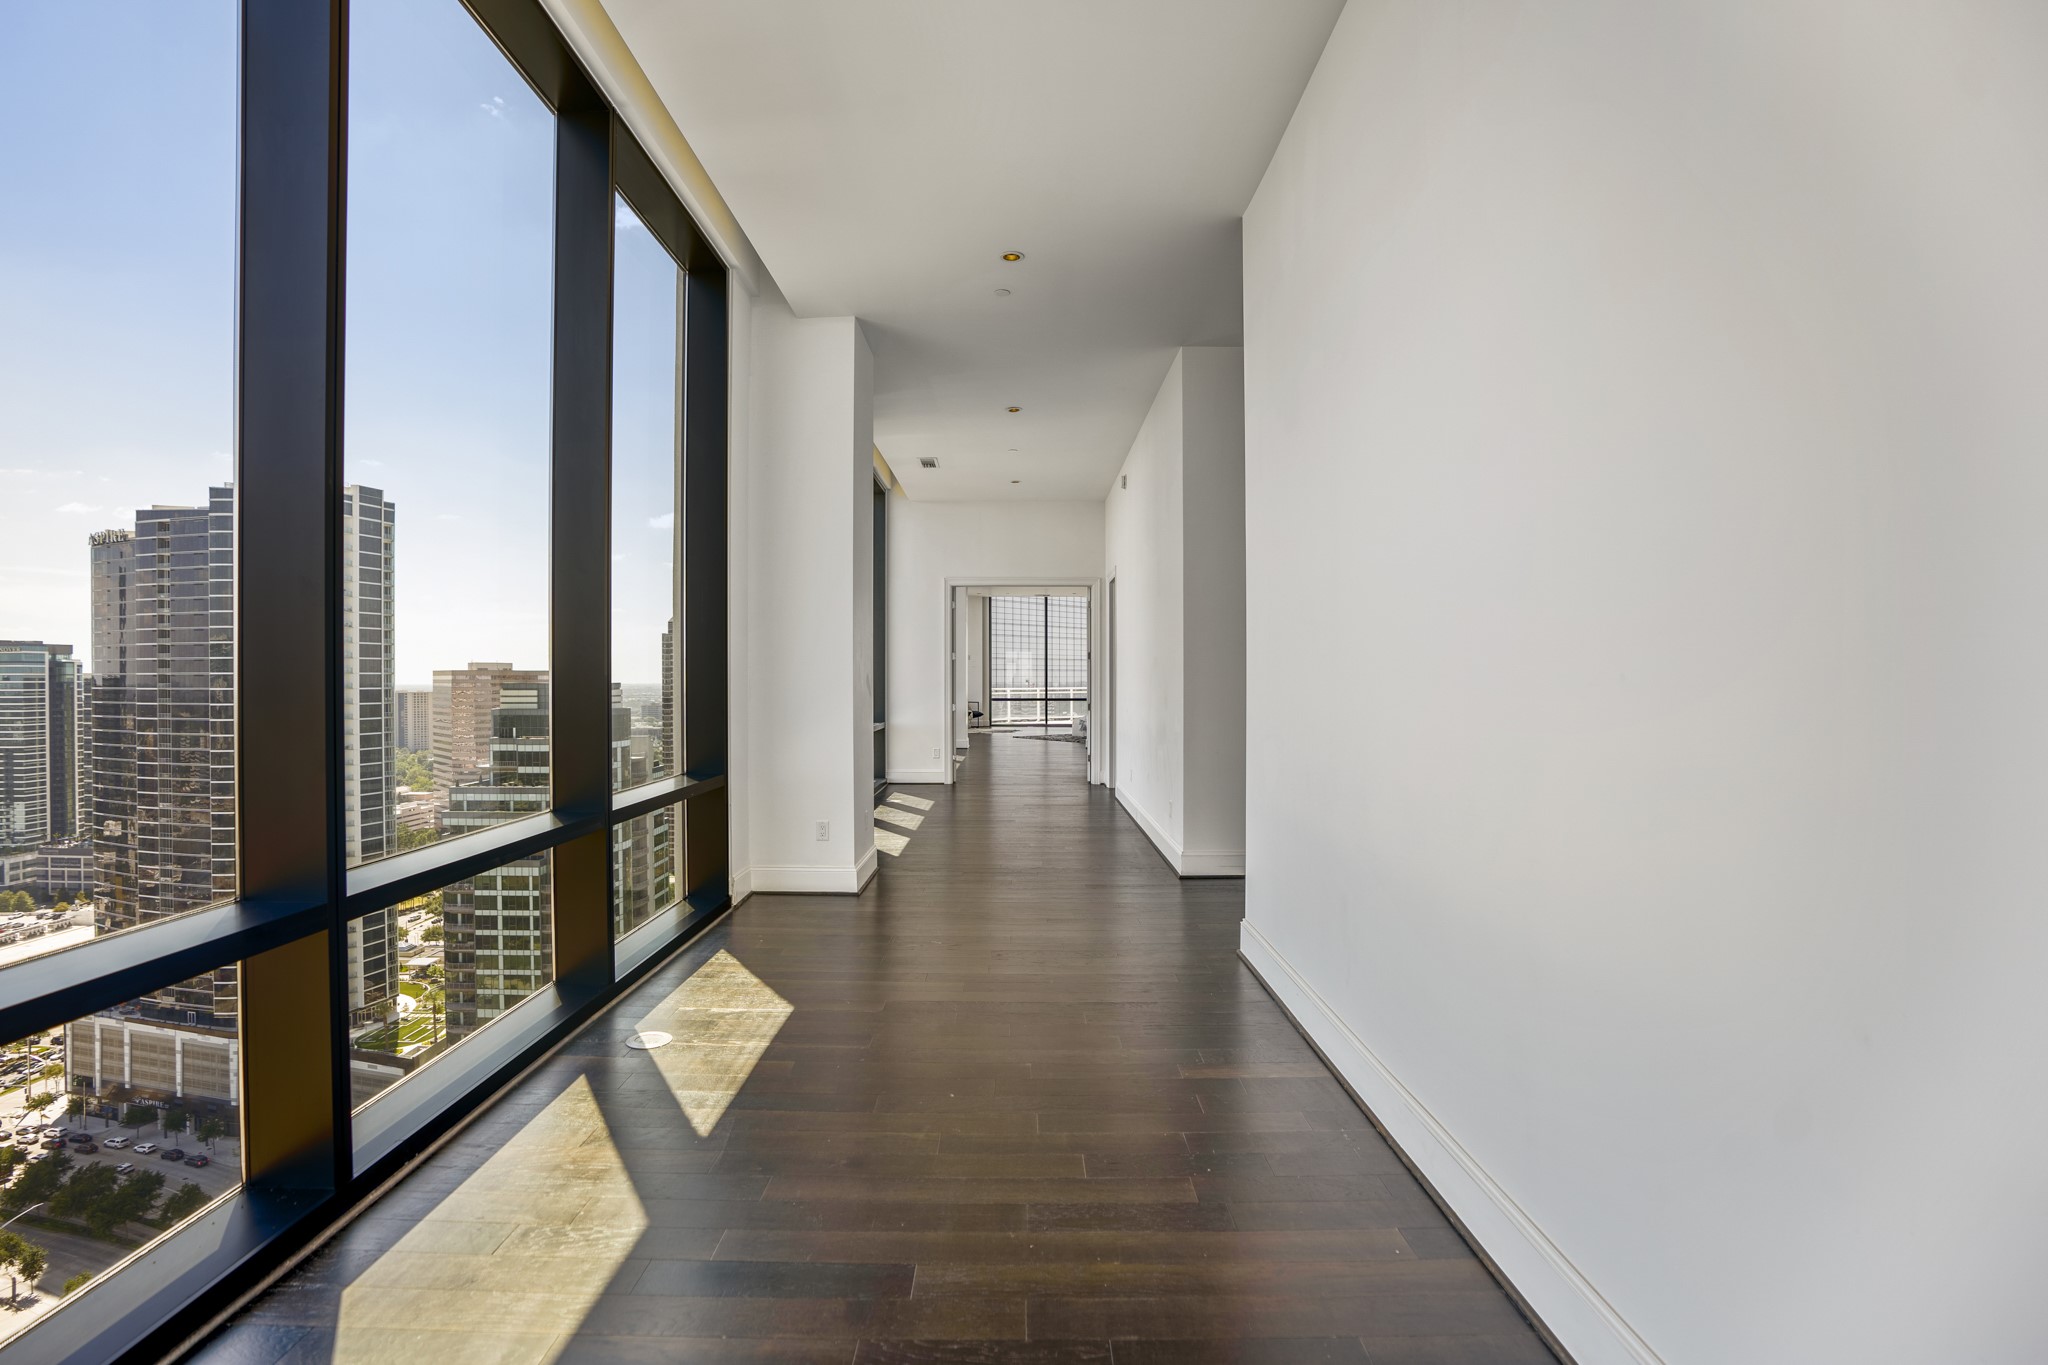 Floor to ceiling windows
provide natural light all the way
down the hall!